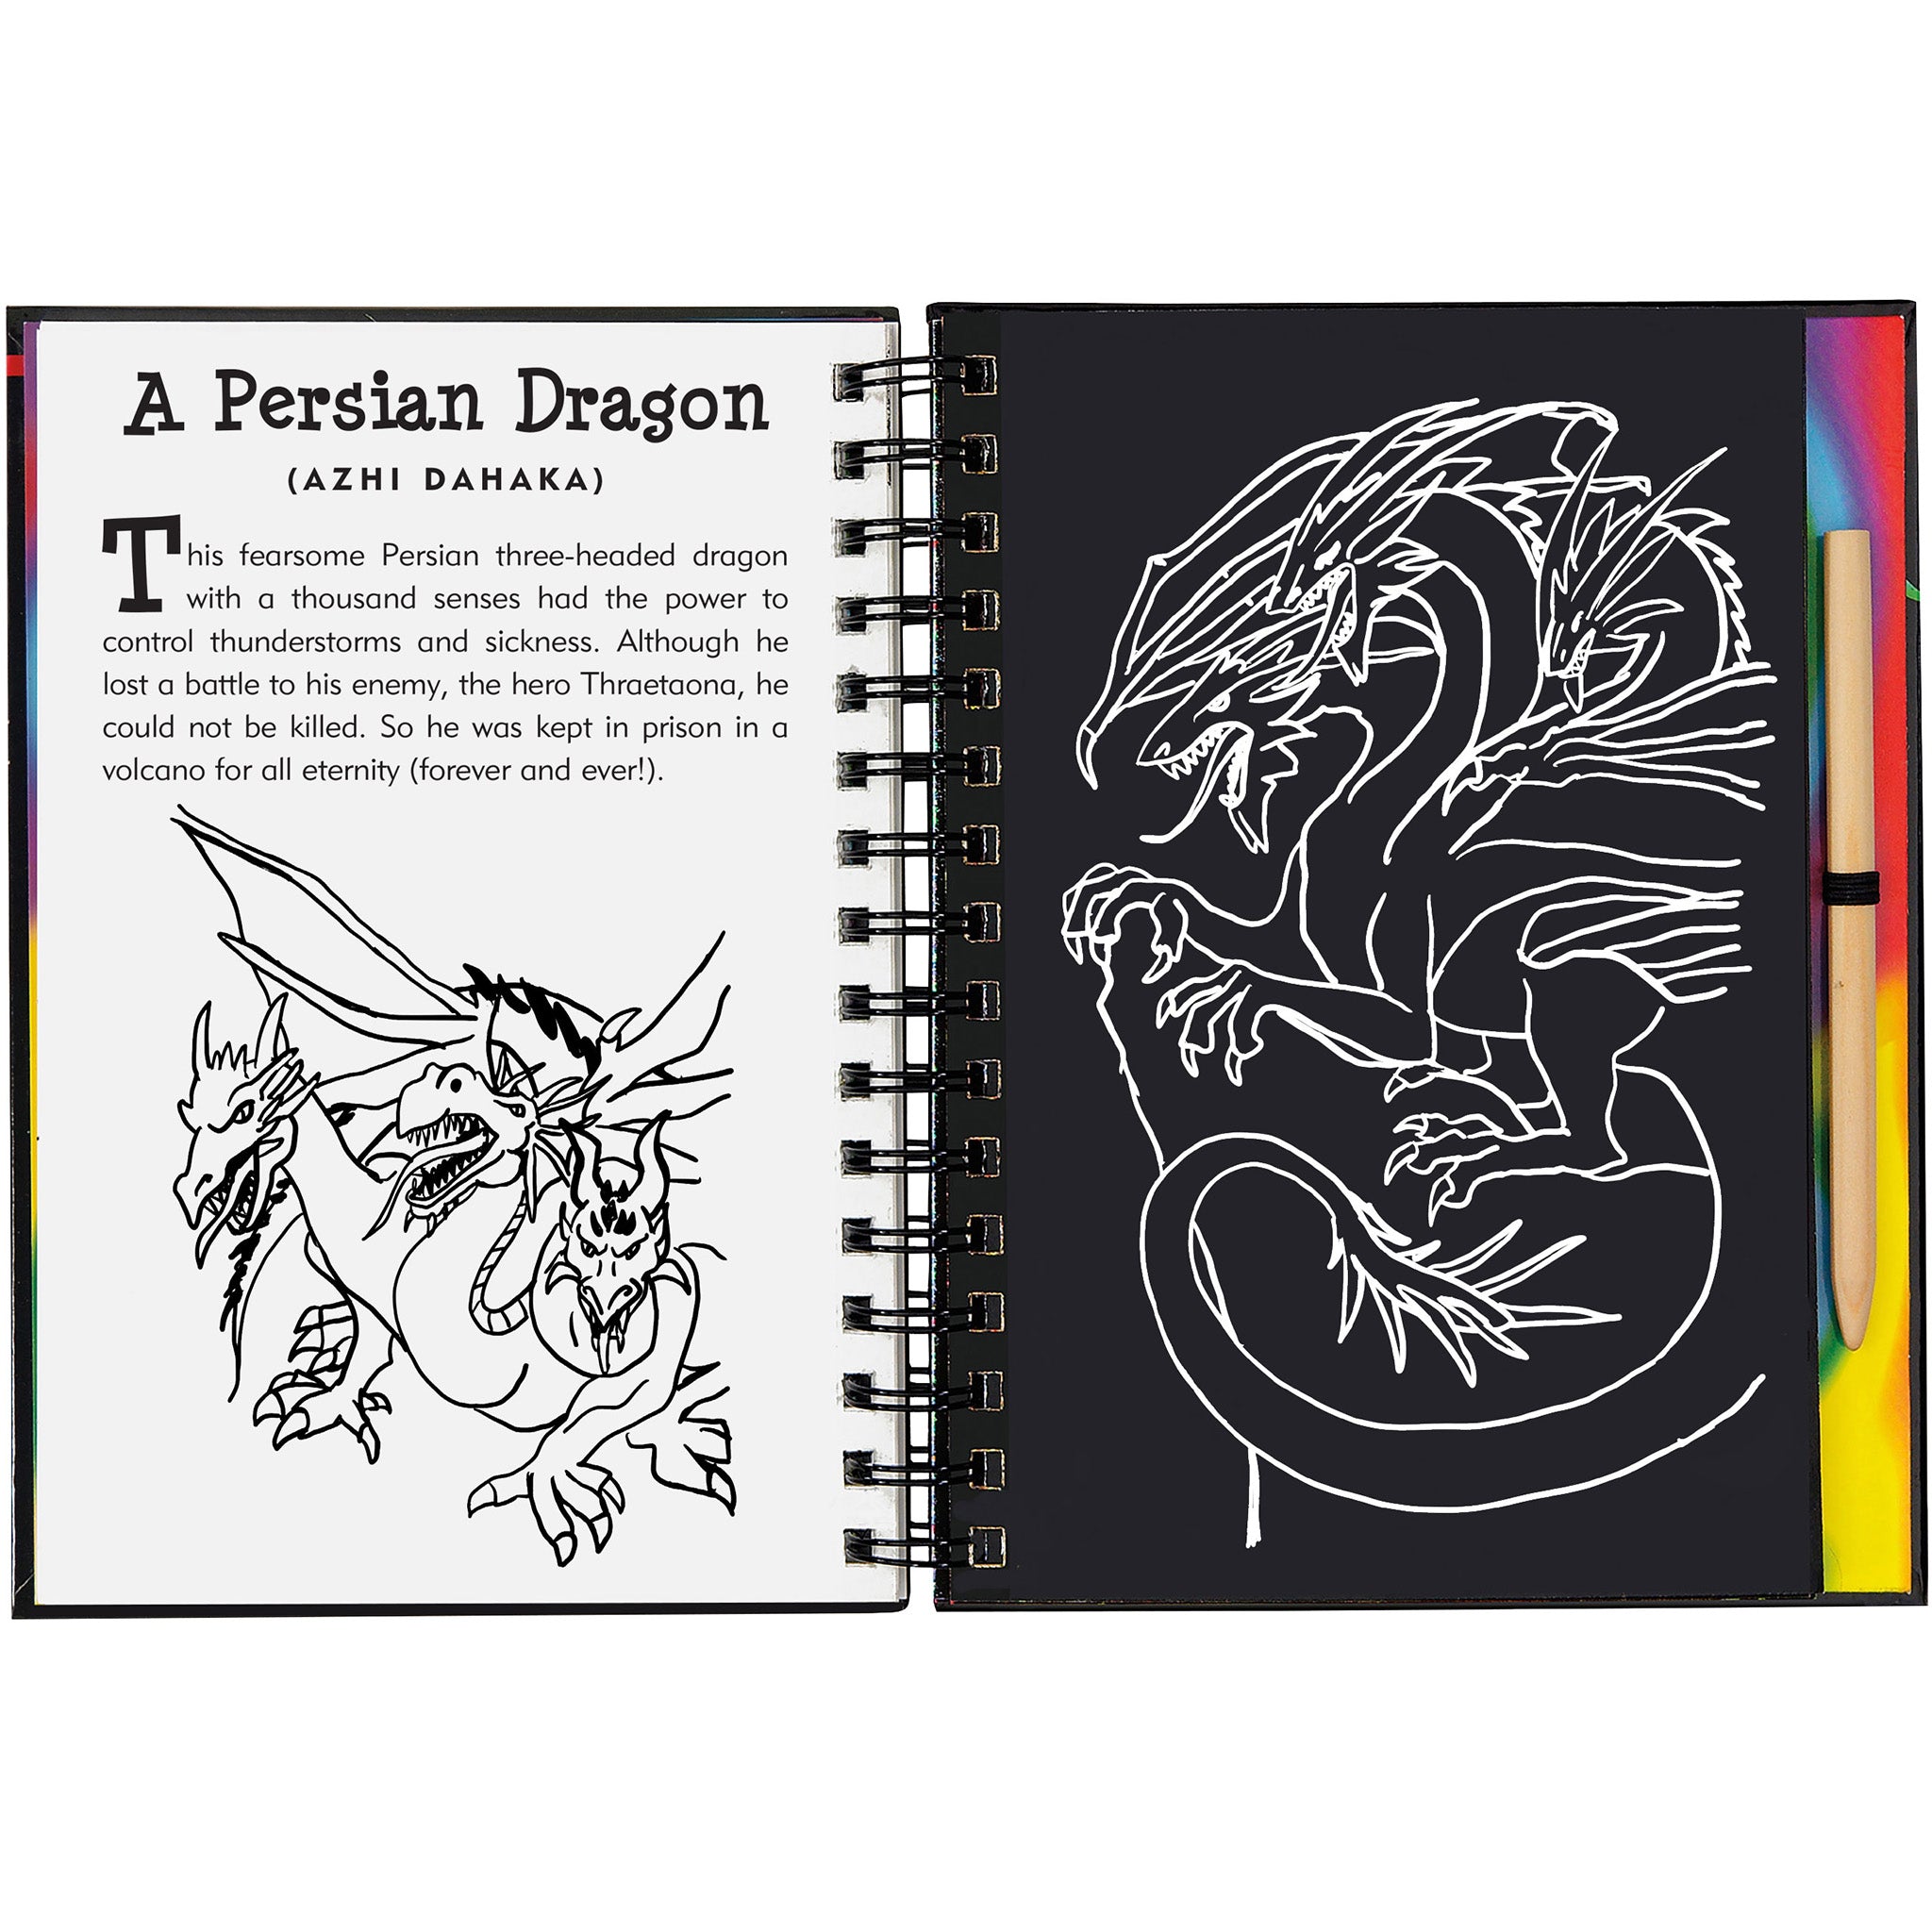 mythical creatures sketches of dragons